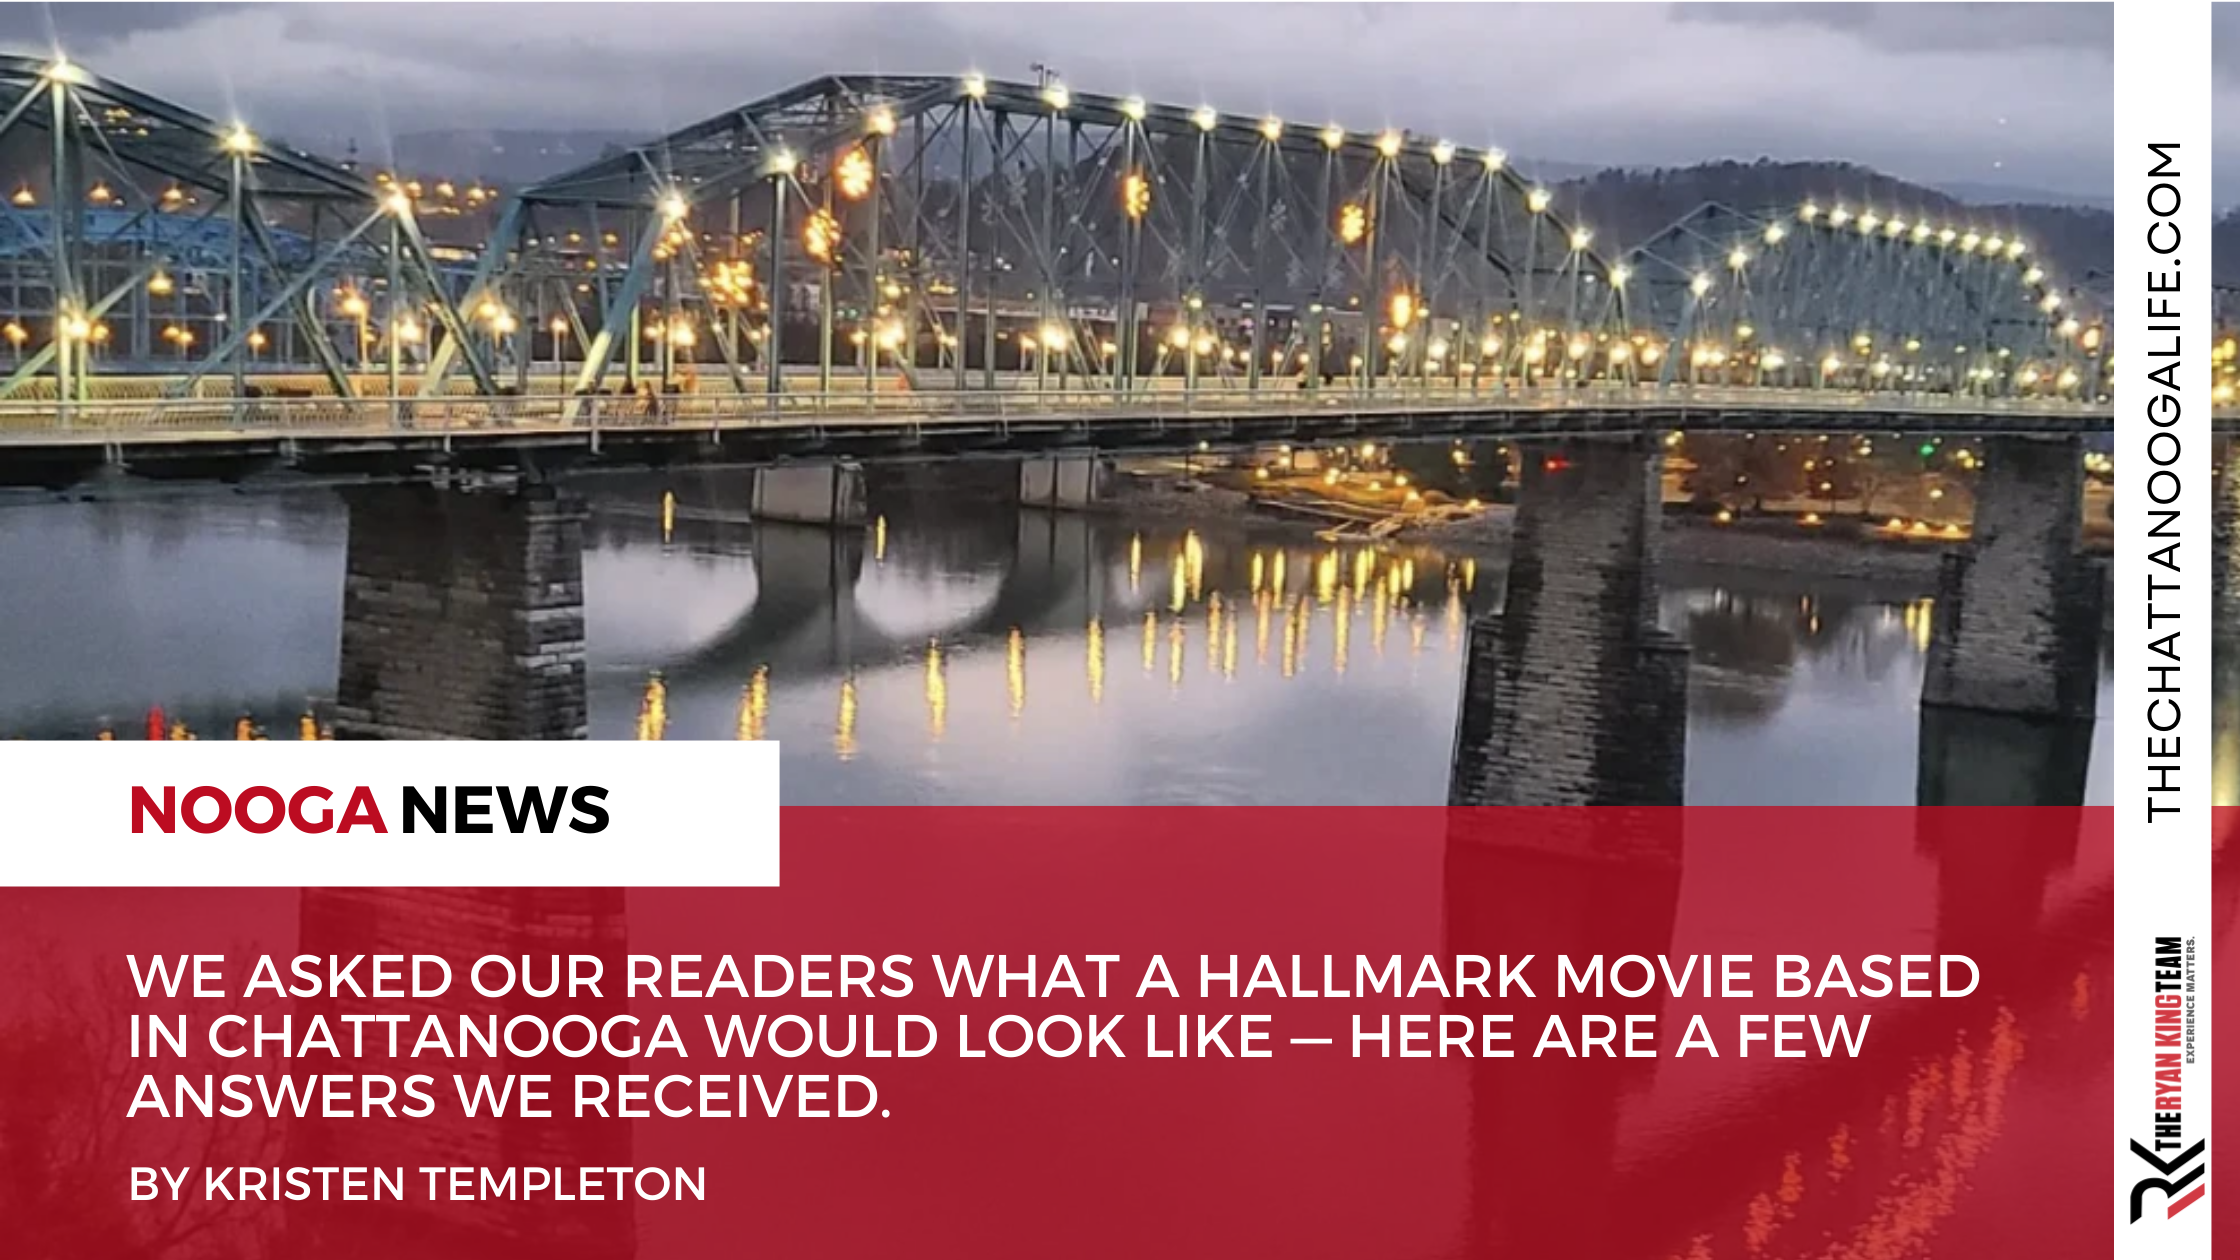 We asked our readers what a Hallmark movie based in Chattanooga would look like — here are a few answers we received.